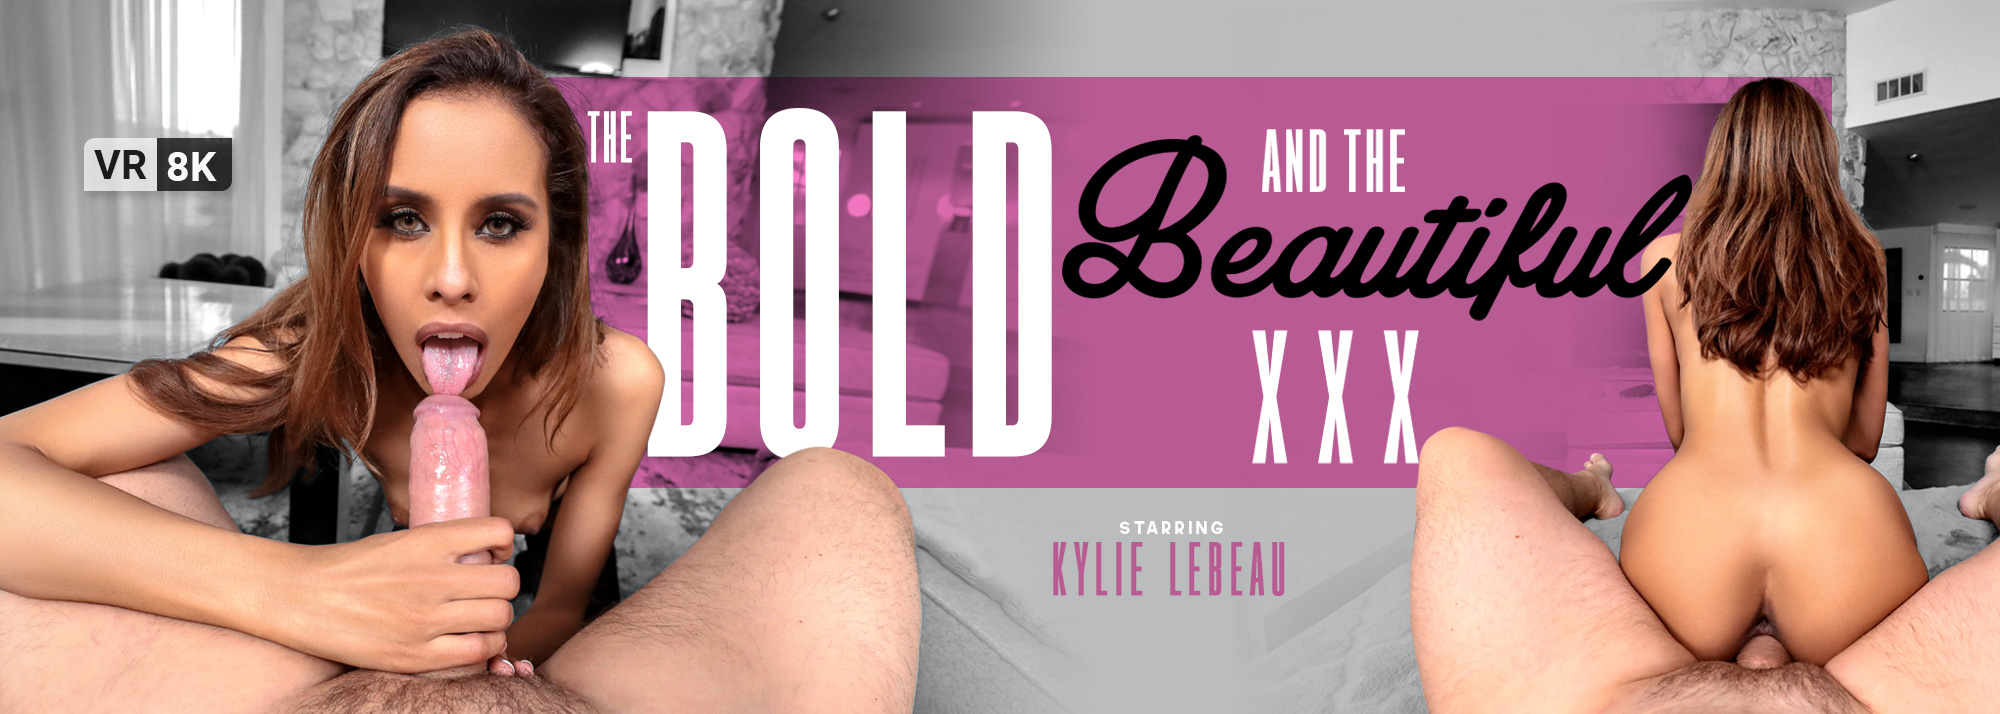 The Bold and The Beautiful XXX - VR Porn Video, Starring Kylie Le Beau VR